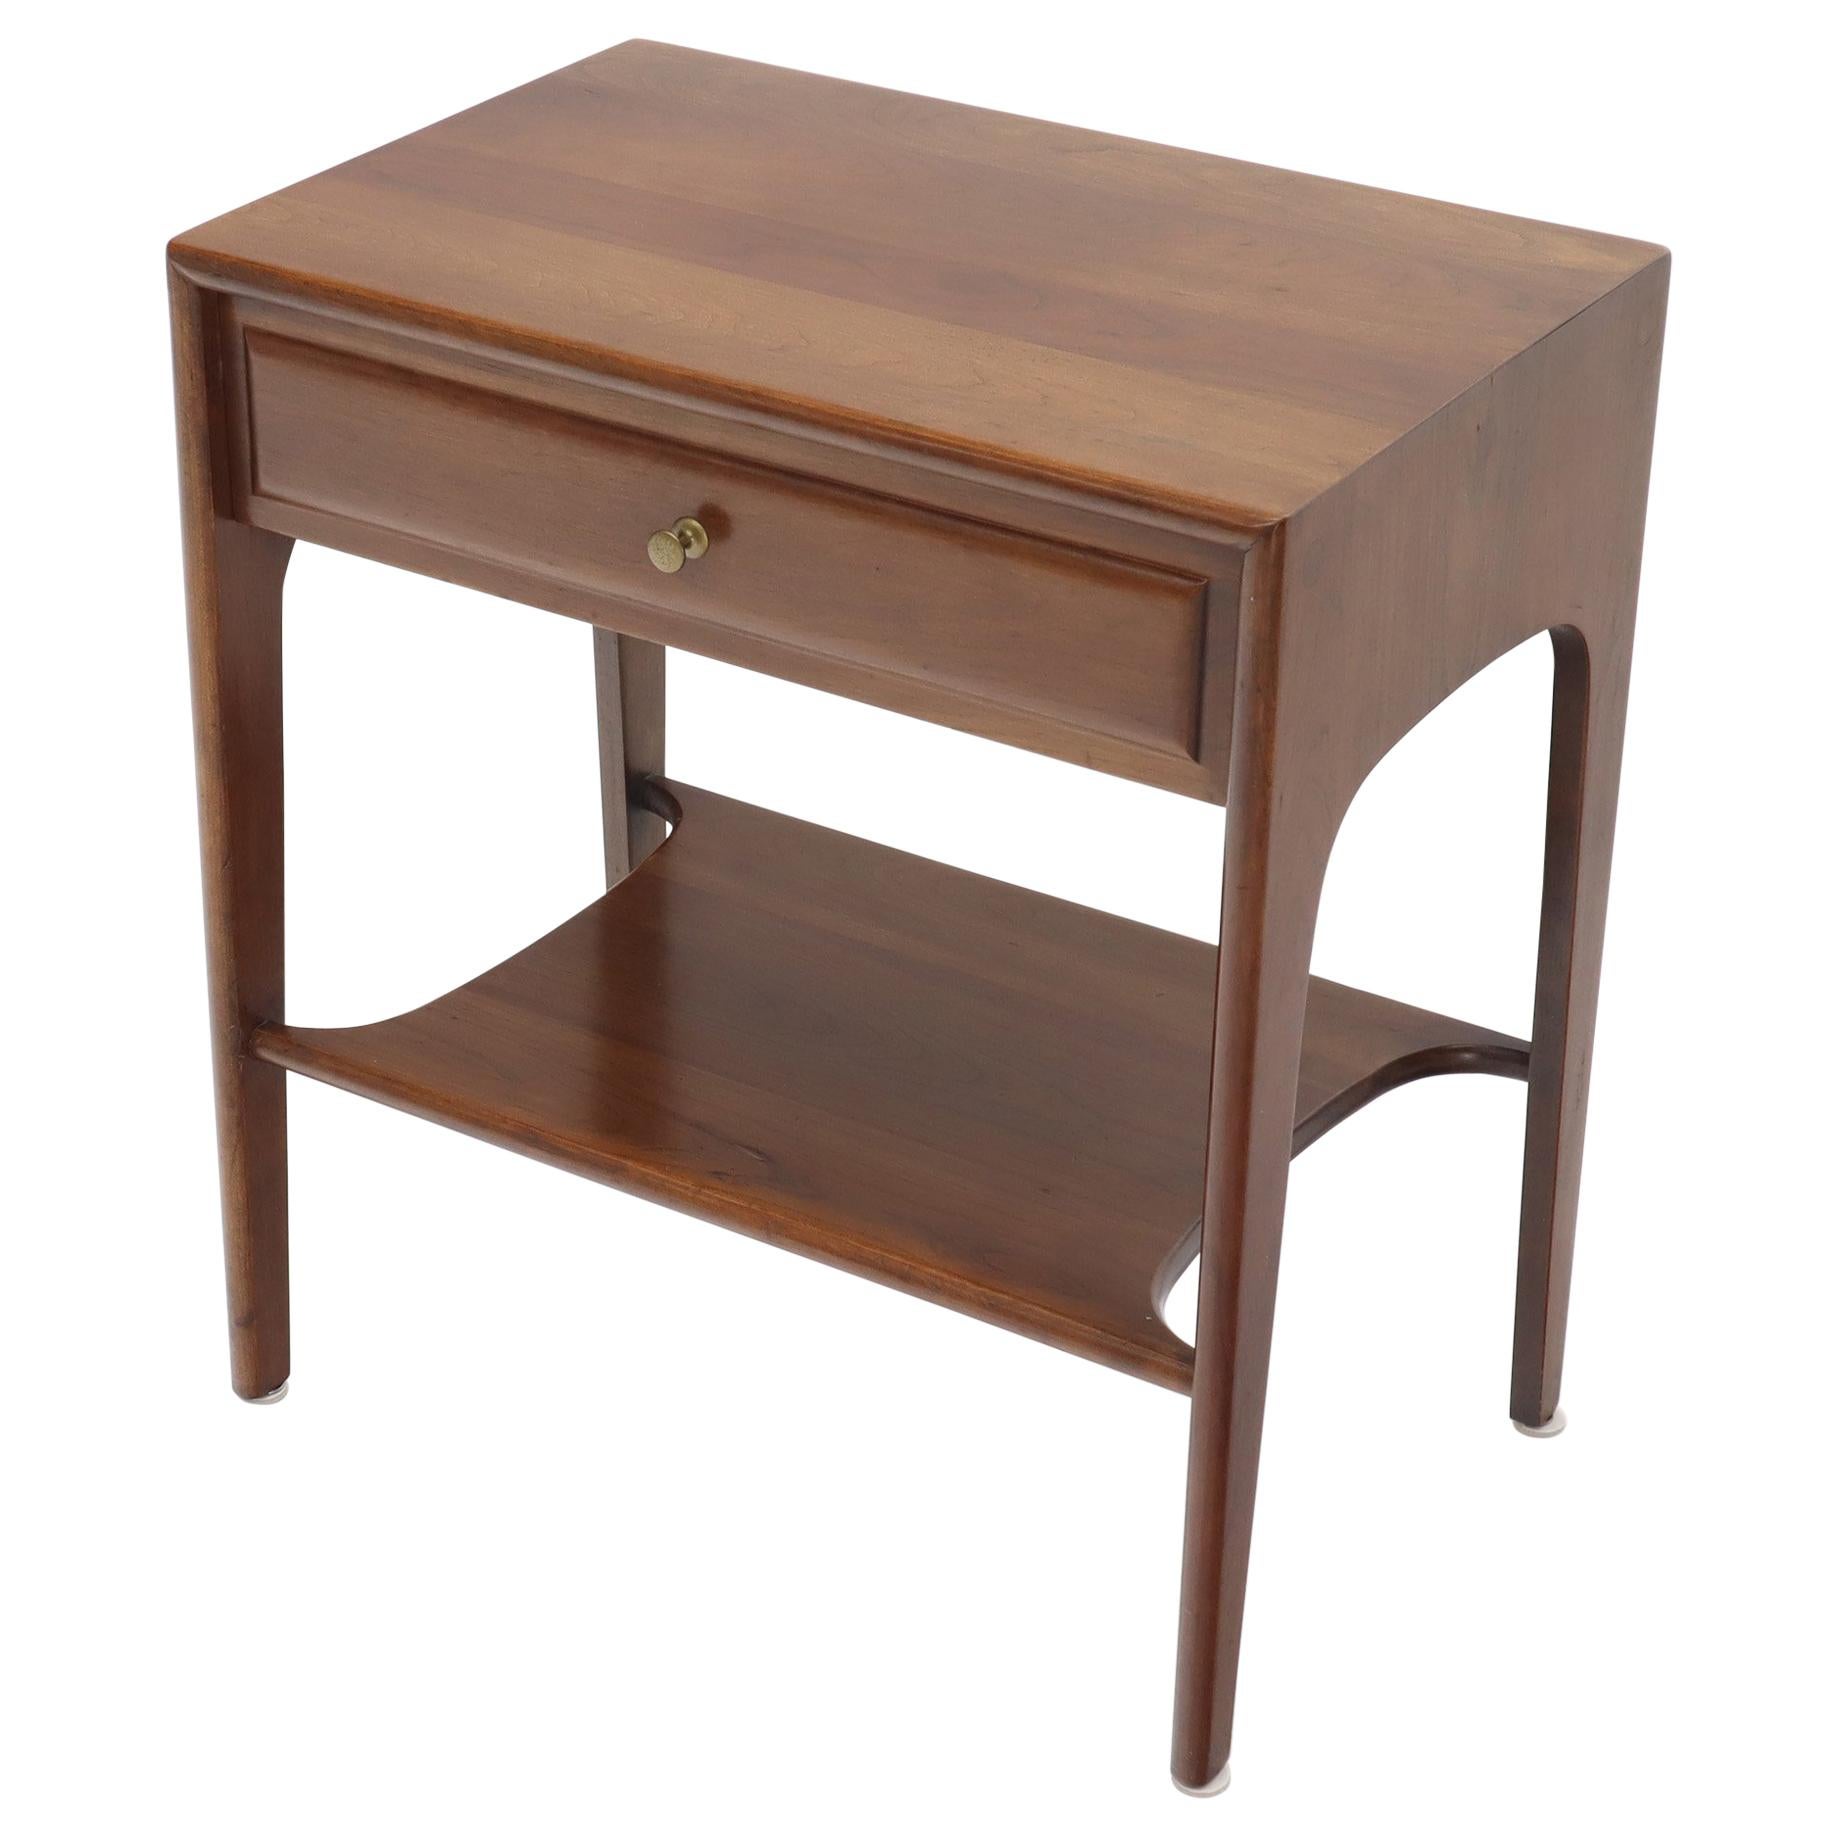 Solid Cherry One Drawer End Table Nightstand Mid-Century Modern